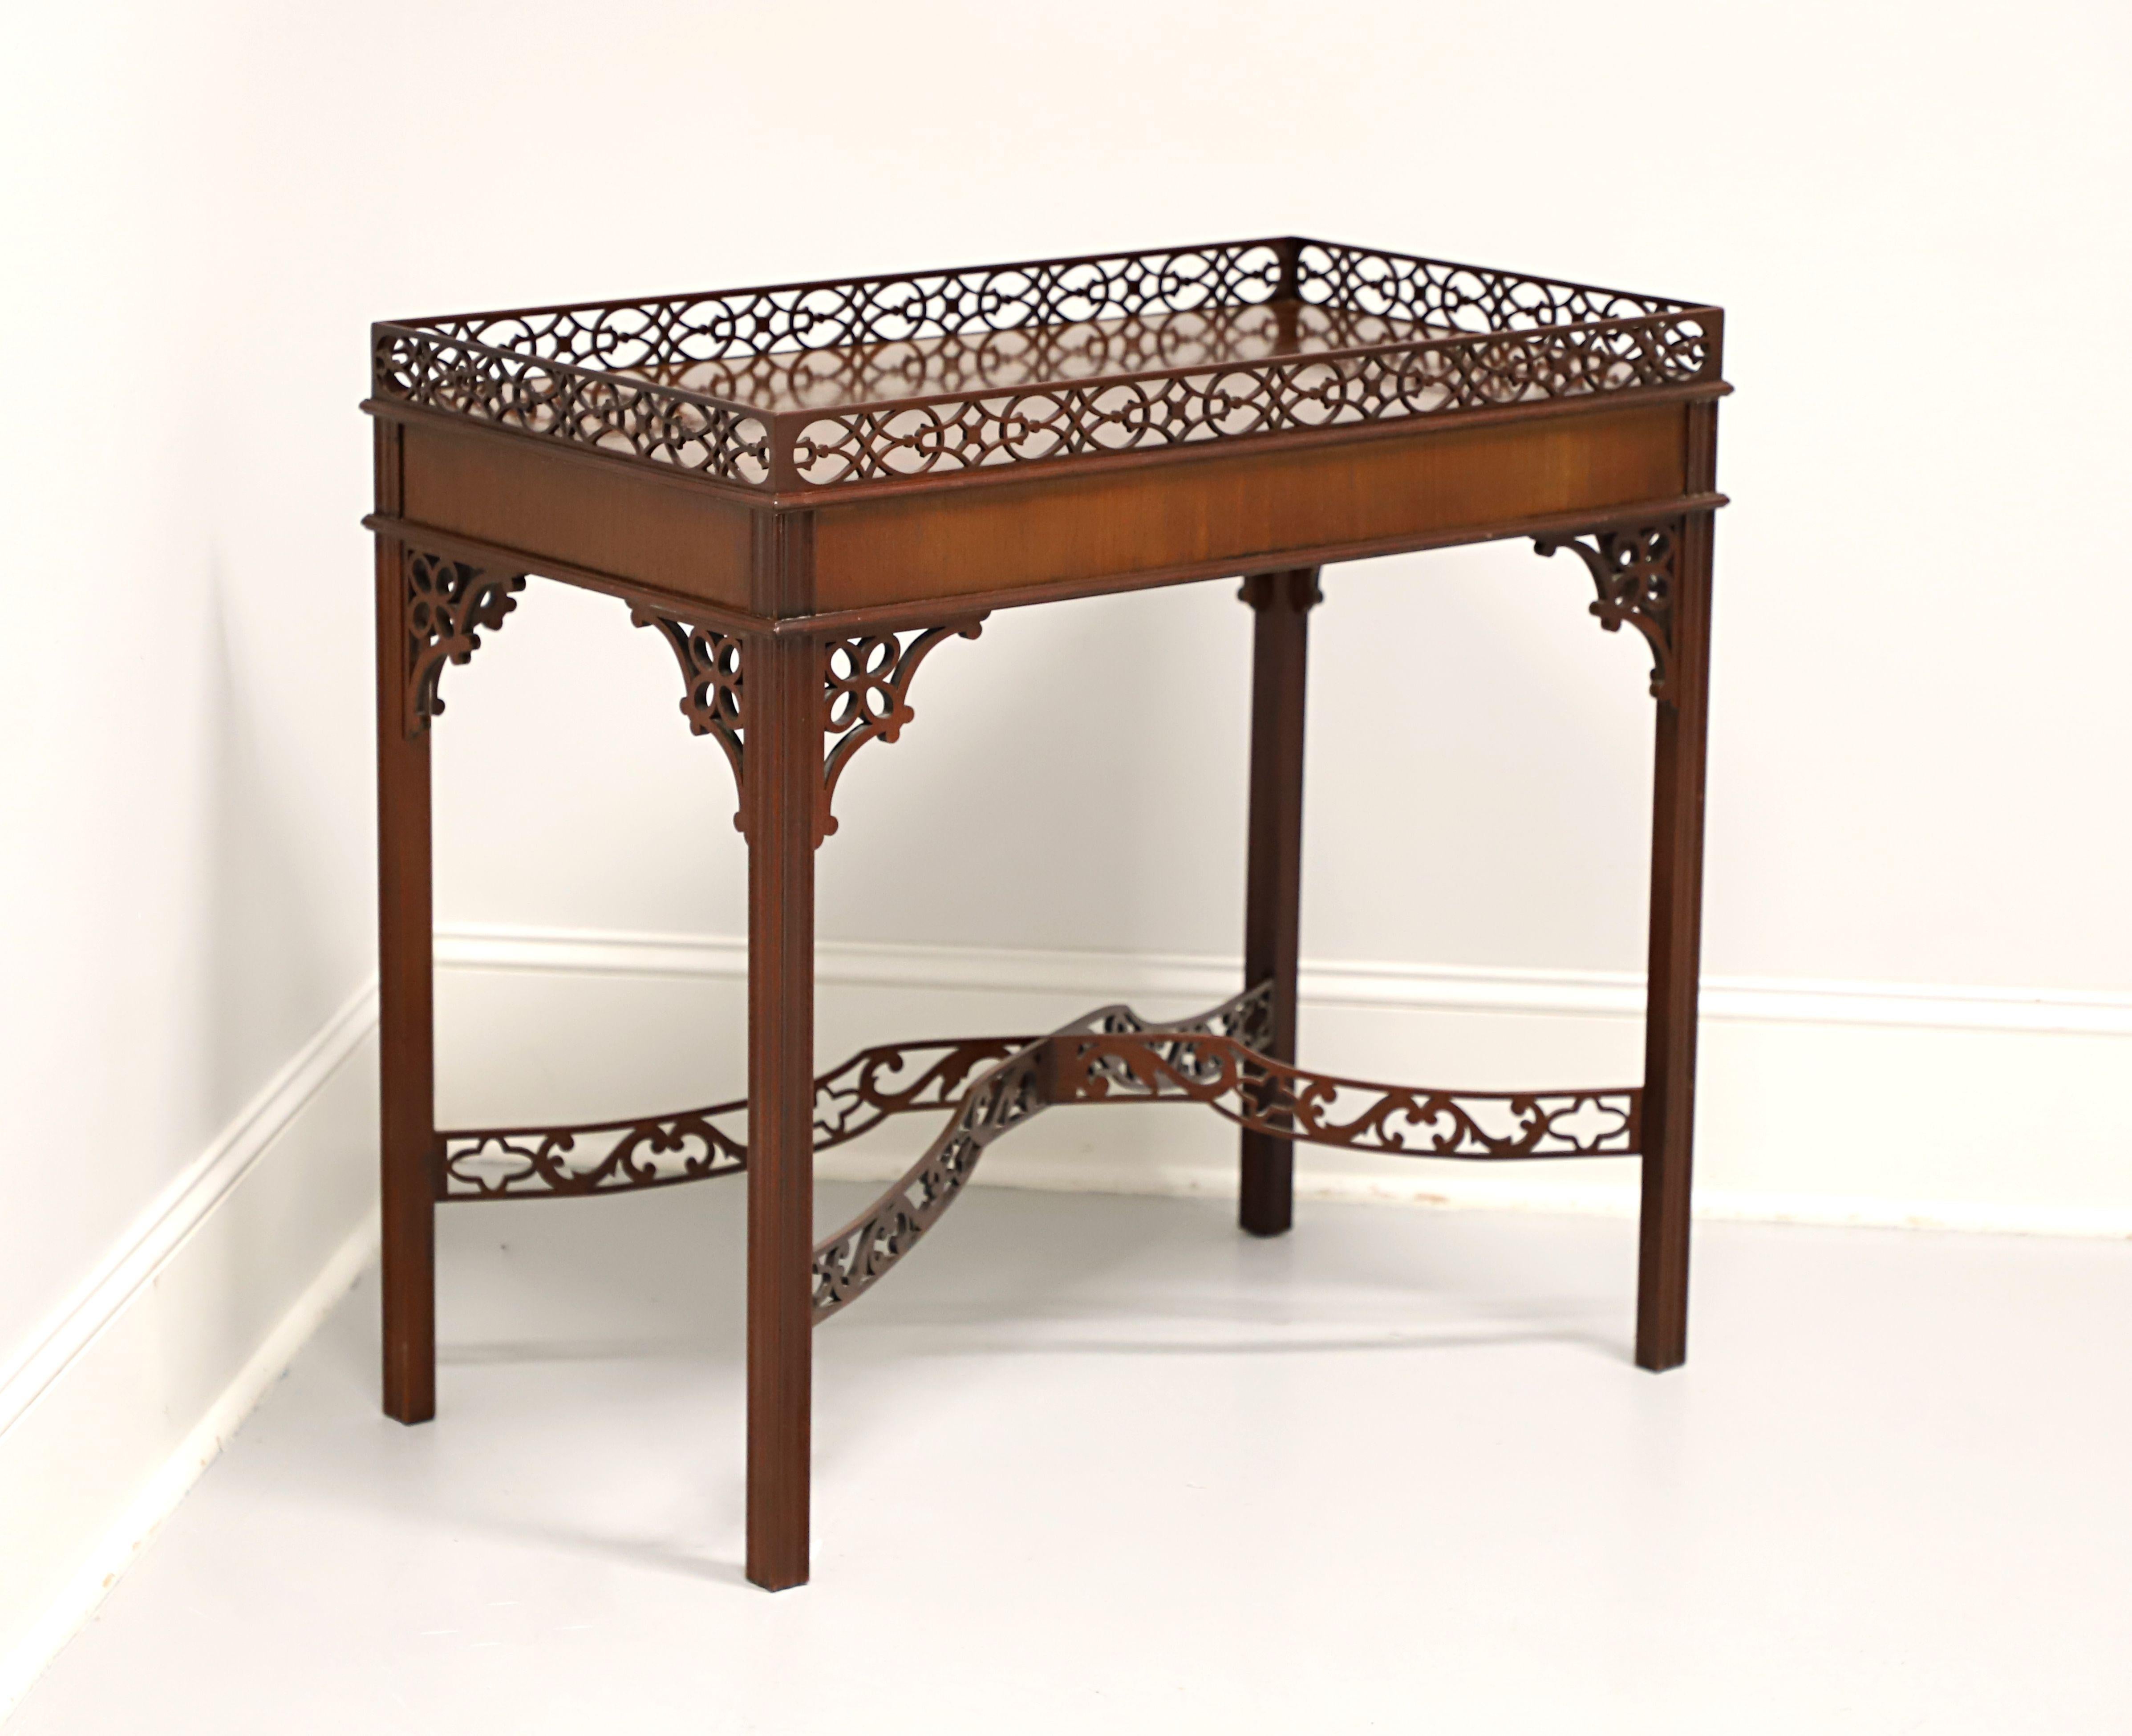 BAKER Mahogany Chippendale Style Fretwork Gallery Tea Table 3